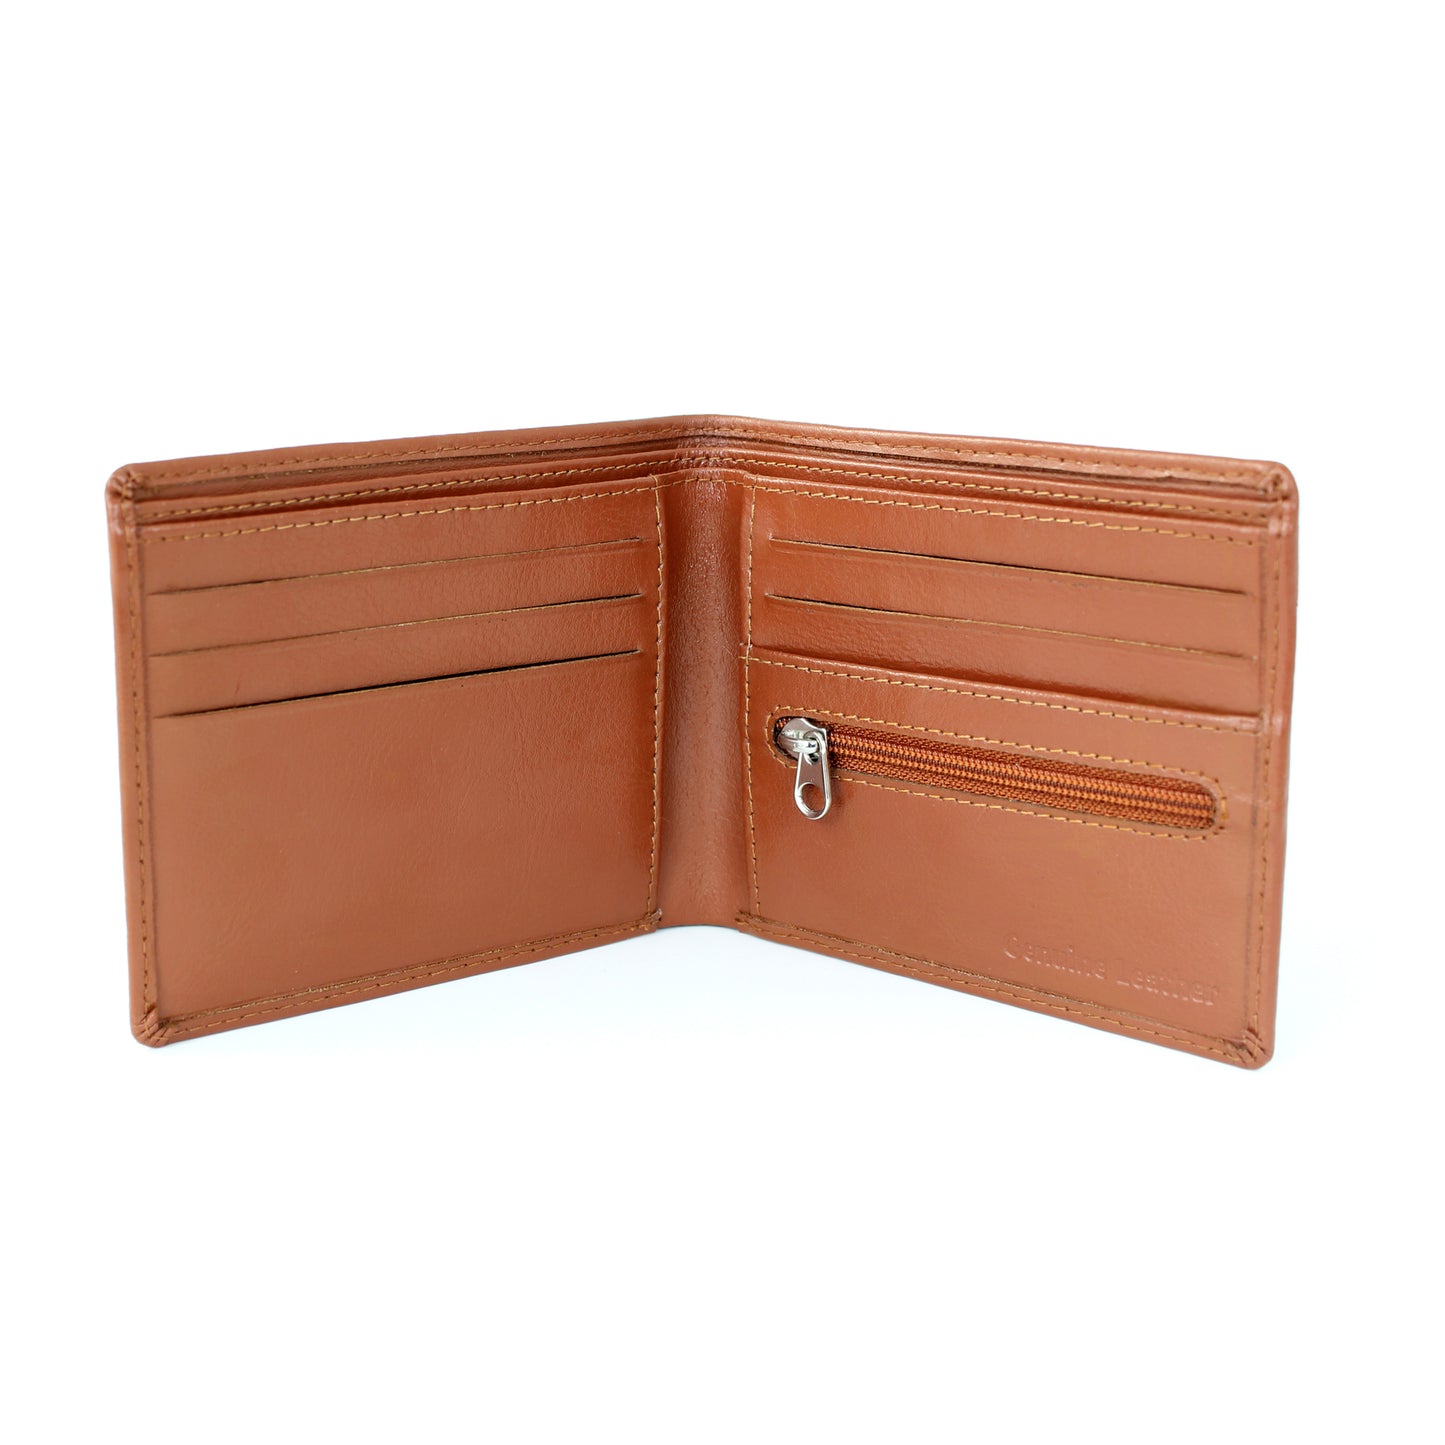 Personalised Big Initials Tan Leather Wallet - Personalise It!